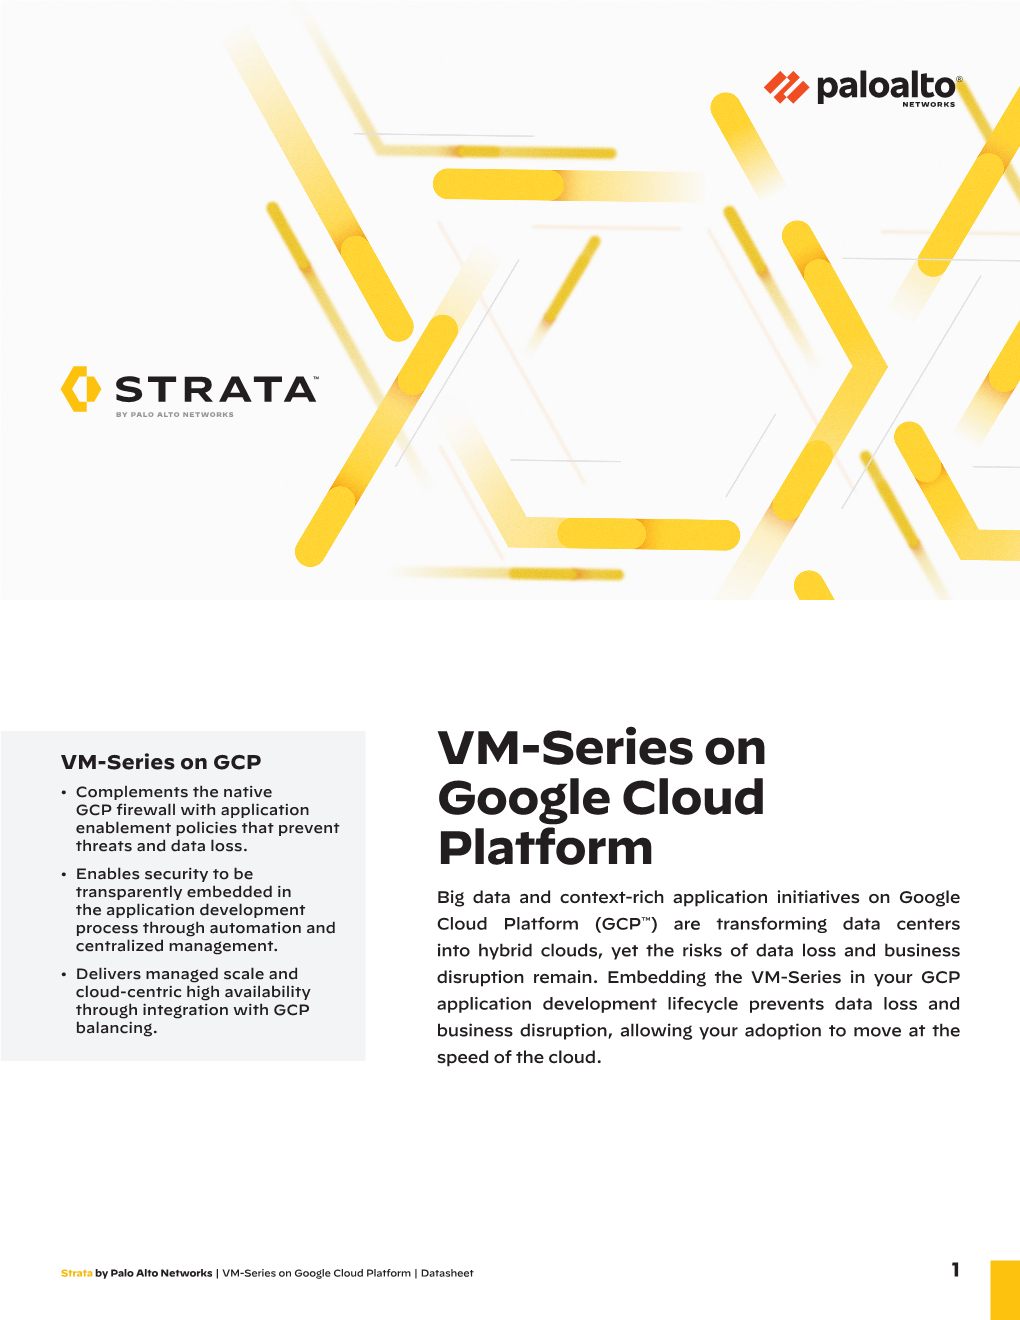 VM-Series on Google Cloud Platform | Datasheet 1 Introduction • Enable You to Add Or Remove Rules at Any Time, Meaning There Is No Traditional Policy Commit Process